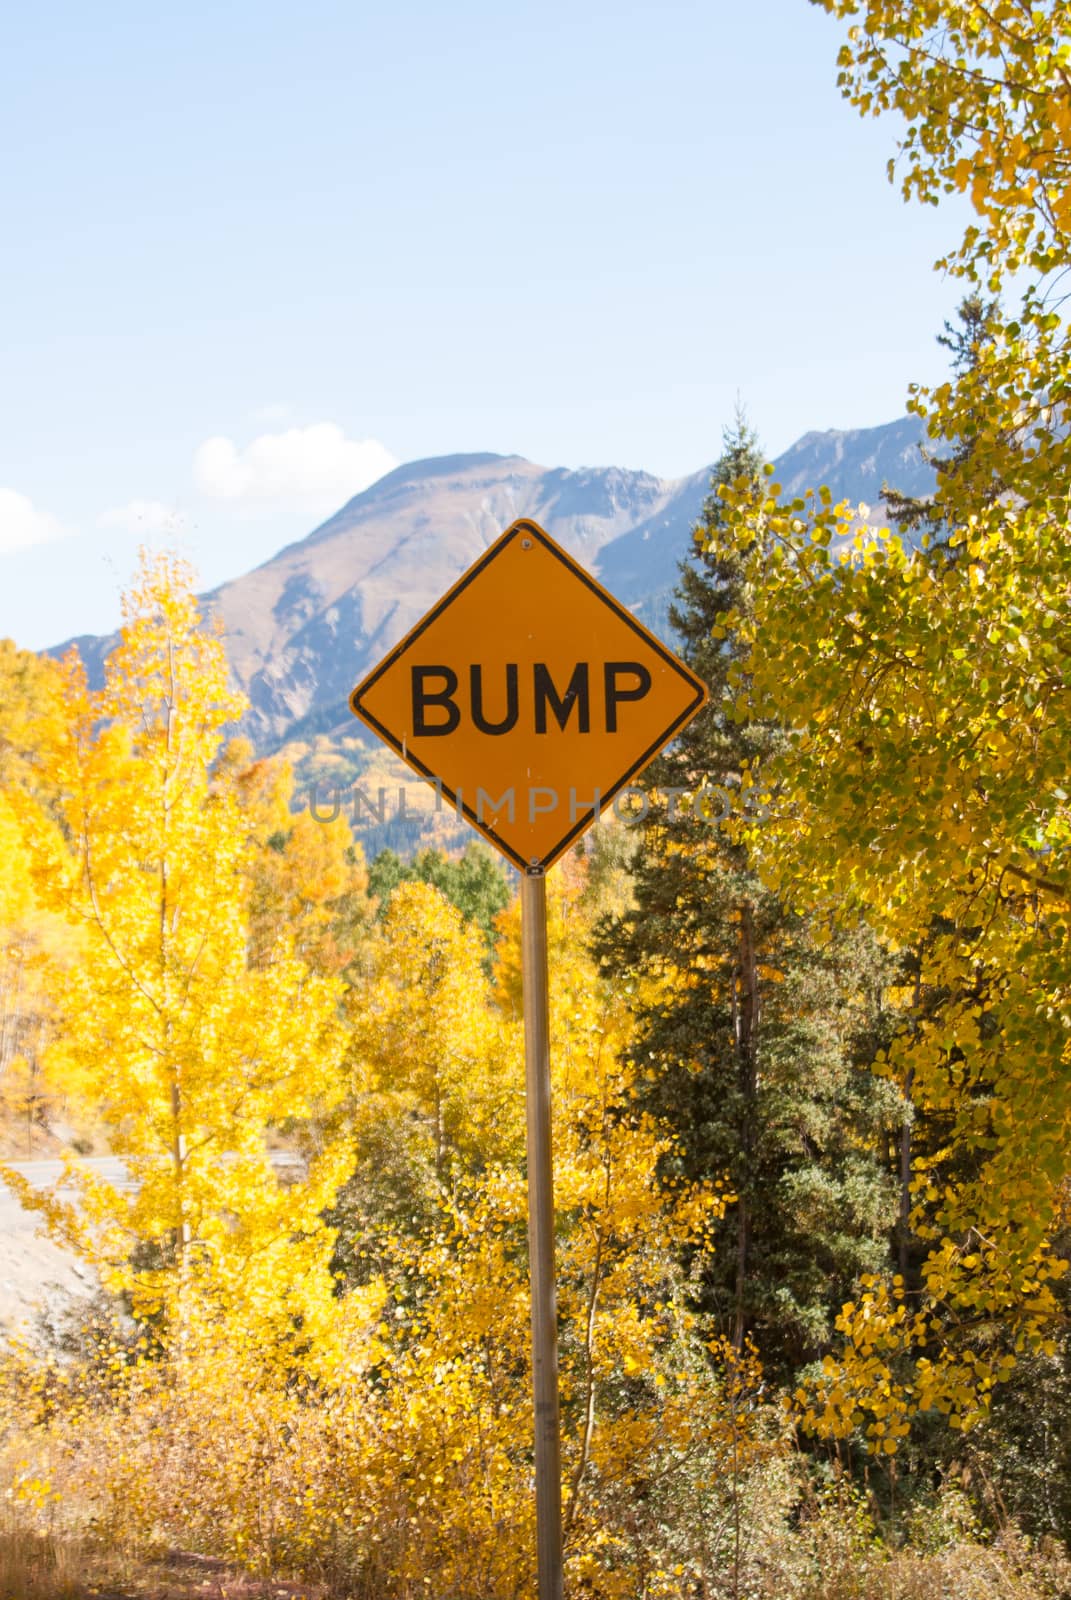 Road sign for Bump in Colorado mountains in Fall